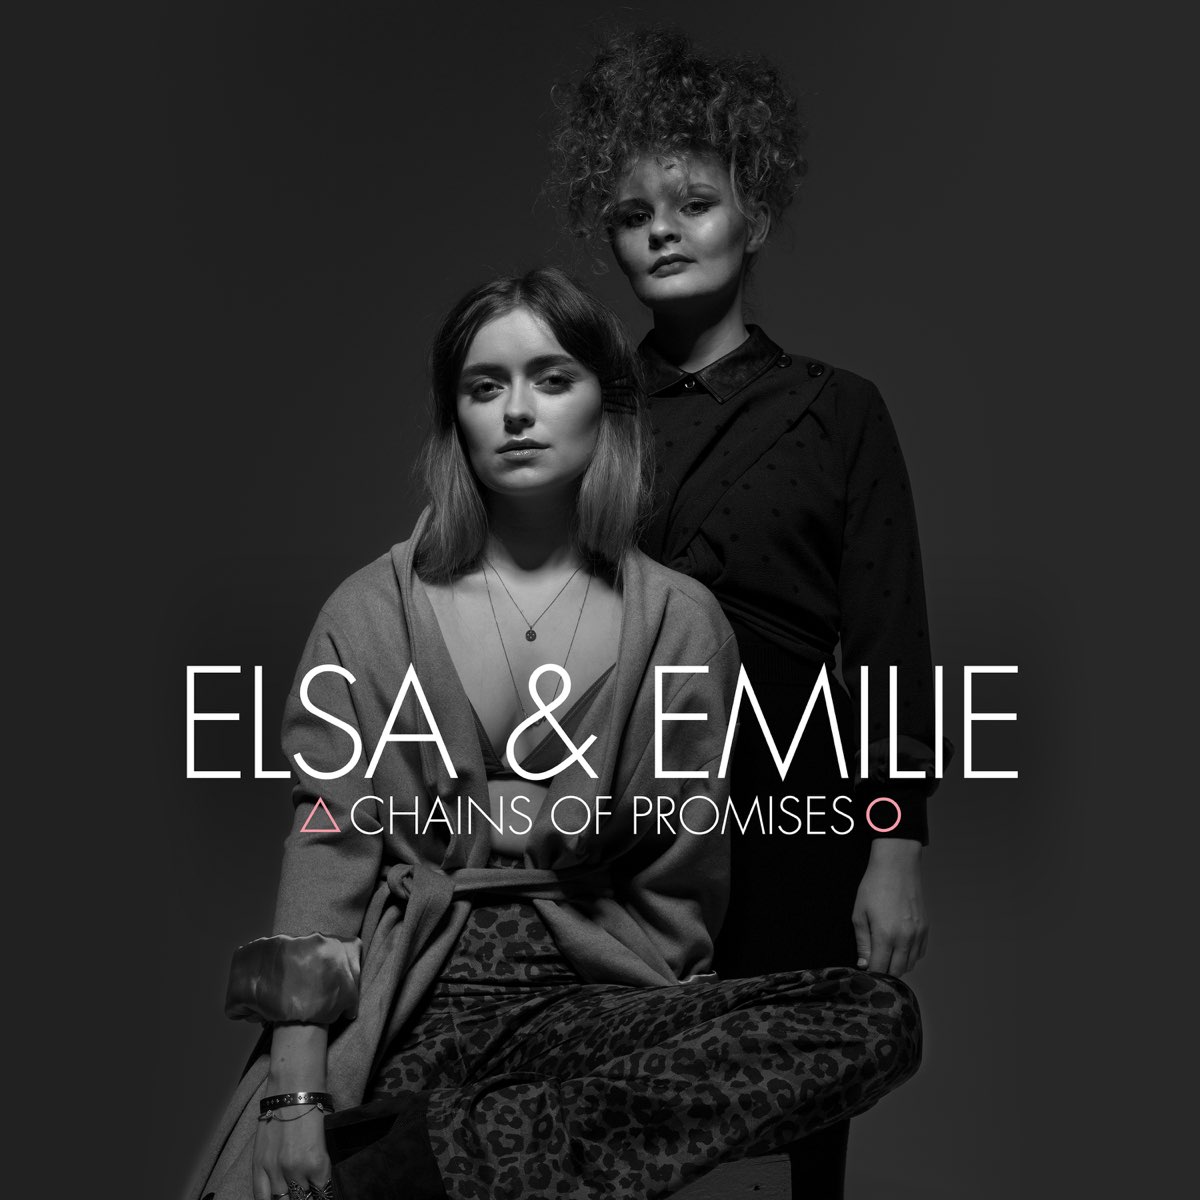 Elsa and Emilie Chains of Promises cover artwork